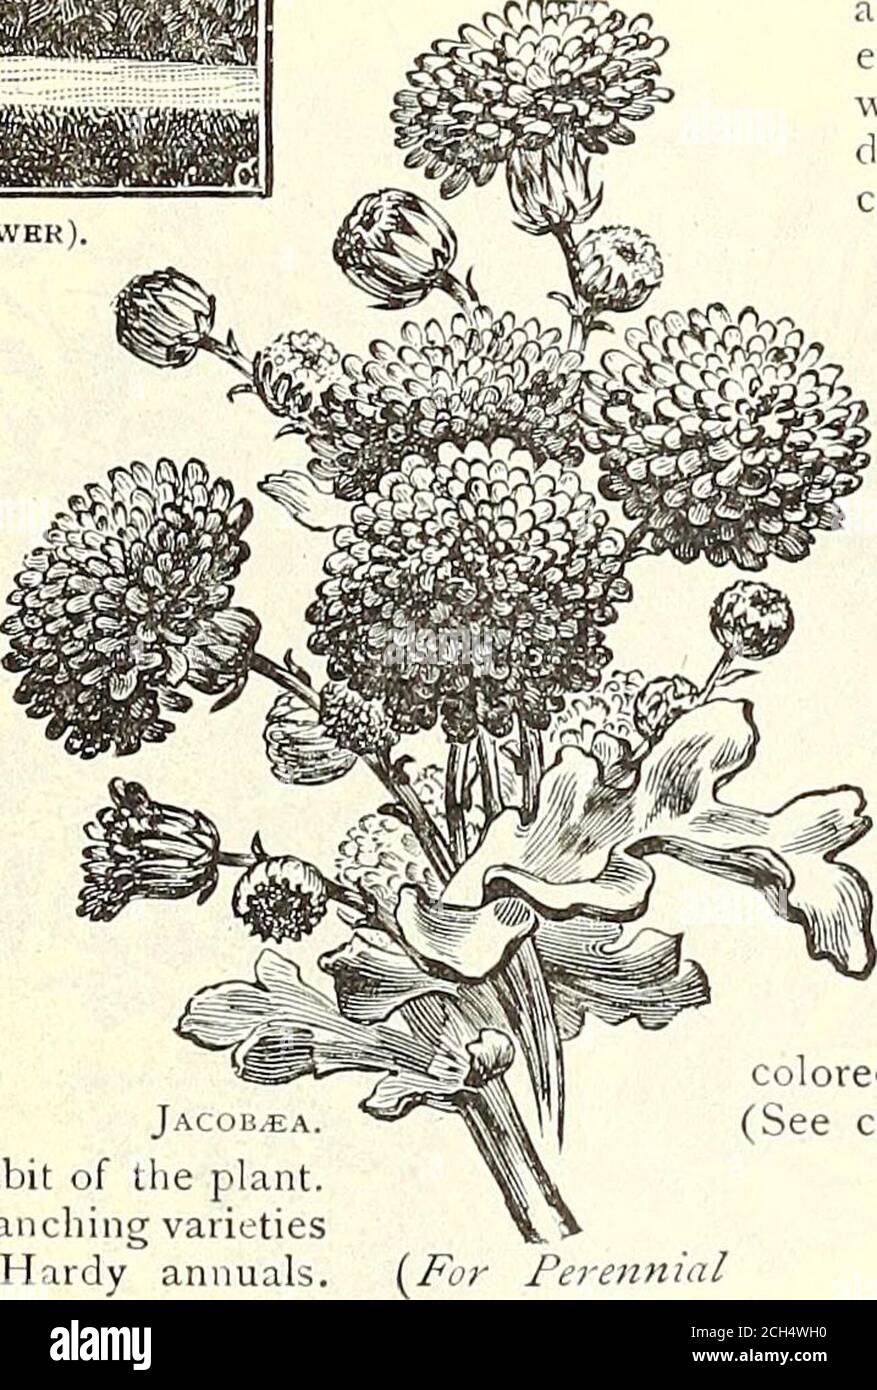 . Dreer's garden 1902 calendar . omaa). Small scarlet flowers in profu-sion 5 2851 Bona Nox [Evening Glory). Violet, large, fragrant flowers, expanding in tlie evening. 5 2854 Rubra Coerulea [Heavenly Blue). Immense flowers of bright sky-blue, very beautiful 10 2853 Qrandiflora {A/ooti Flozver). At nightand during dull days the plants are cov-ered with an abundance of large, pure-white, fragrant flowers, 5 to 6 inches indiameter. It grows very rapidly, and willcover a large surface. Per oz., 75 cts. .. 10*2835 SetOSa [Brazilian MorningGlory). Flowers 3 inches ormore across, of a beautiful rose Stock Photo